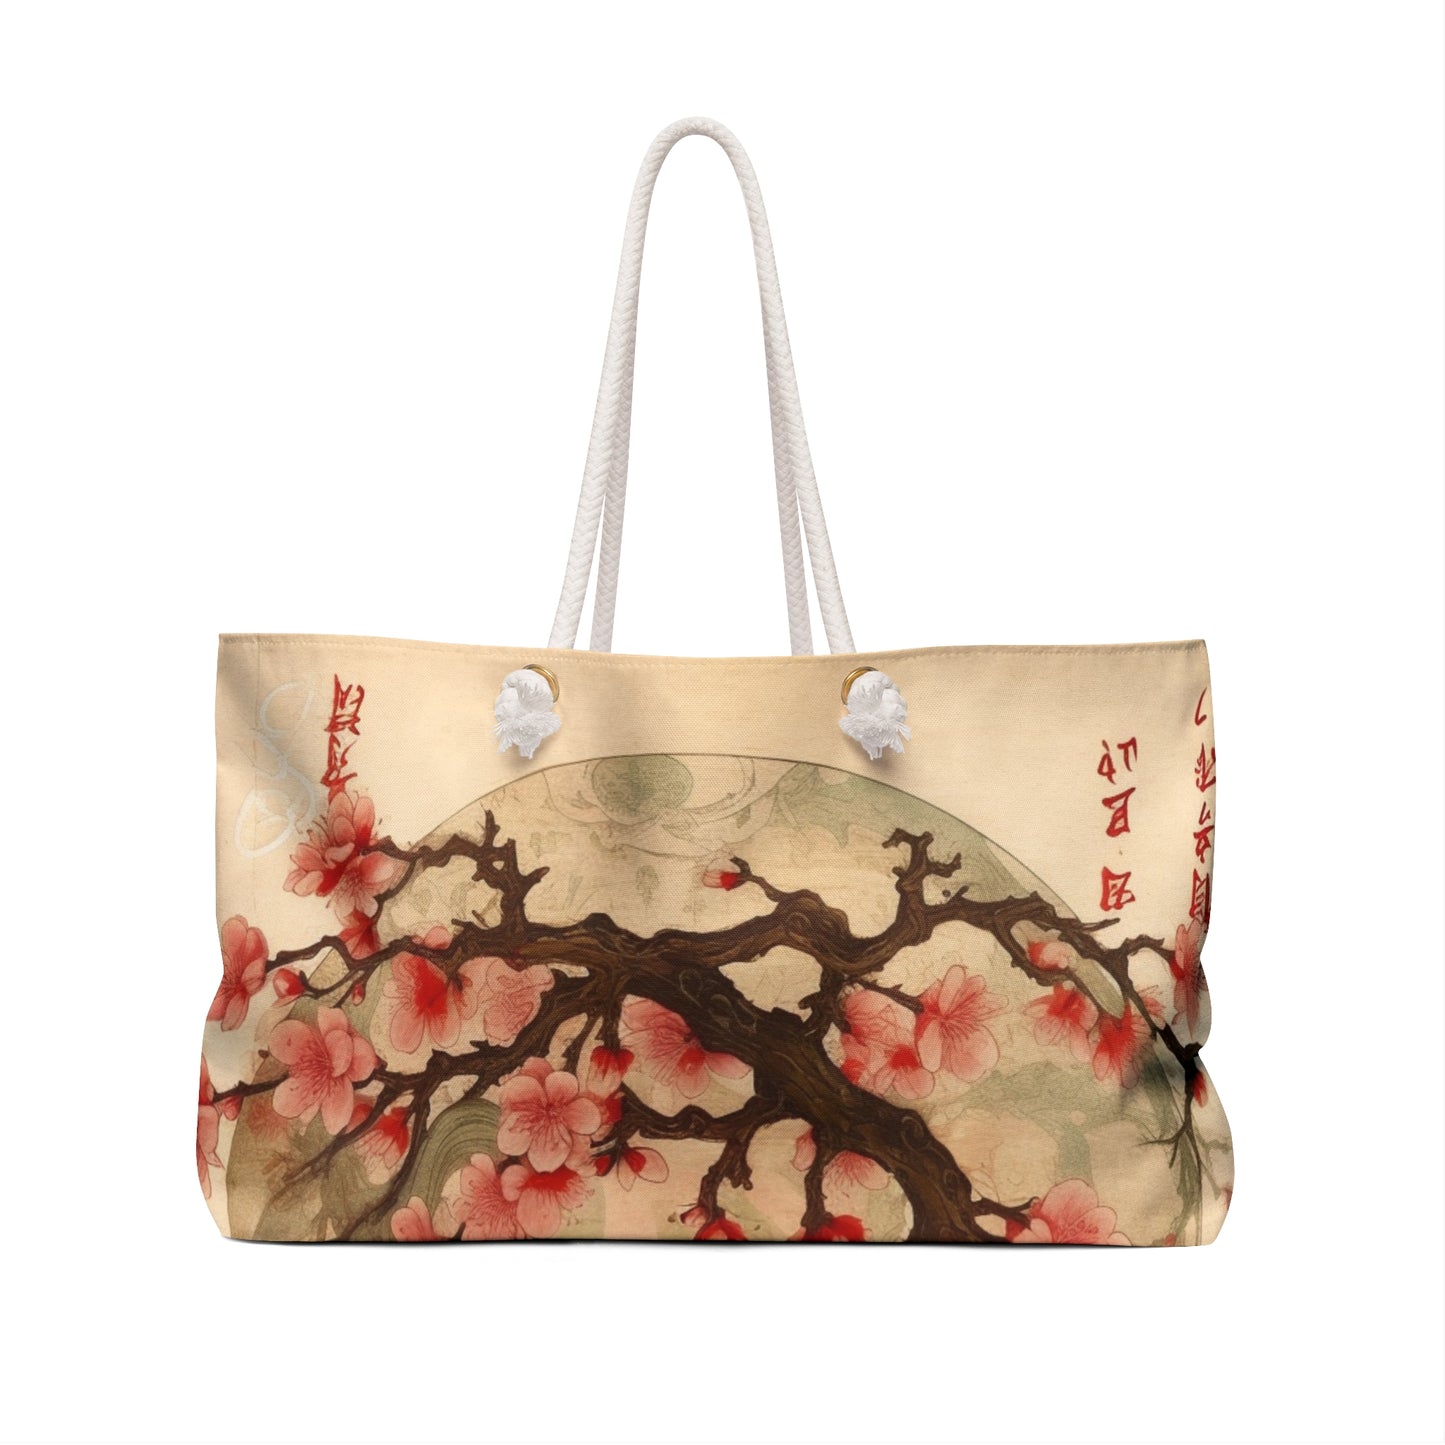 Whimsical Blossom Dreams: Weekender Bag with Delightful Flower Drawings and Cherry Blossoms